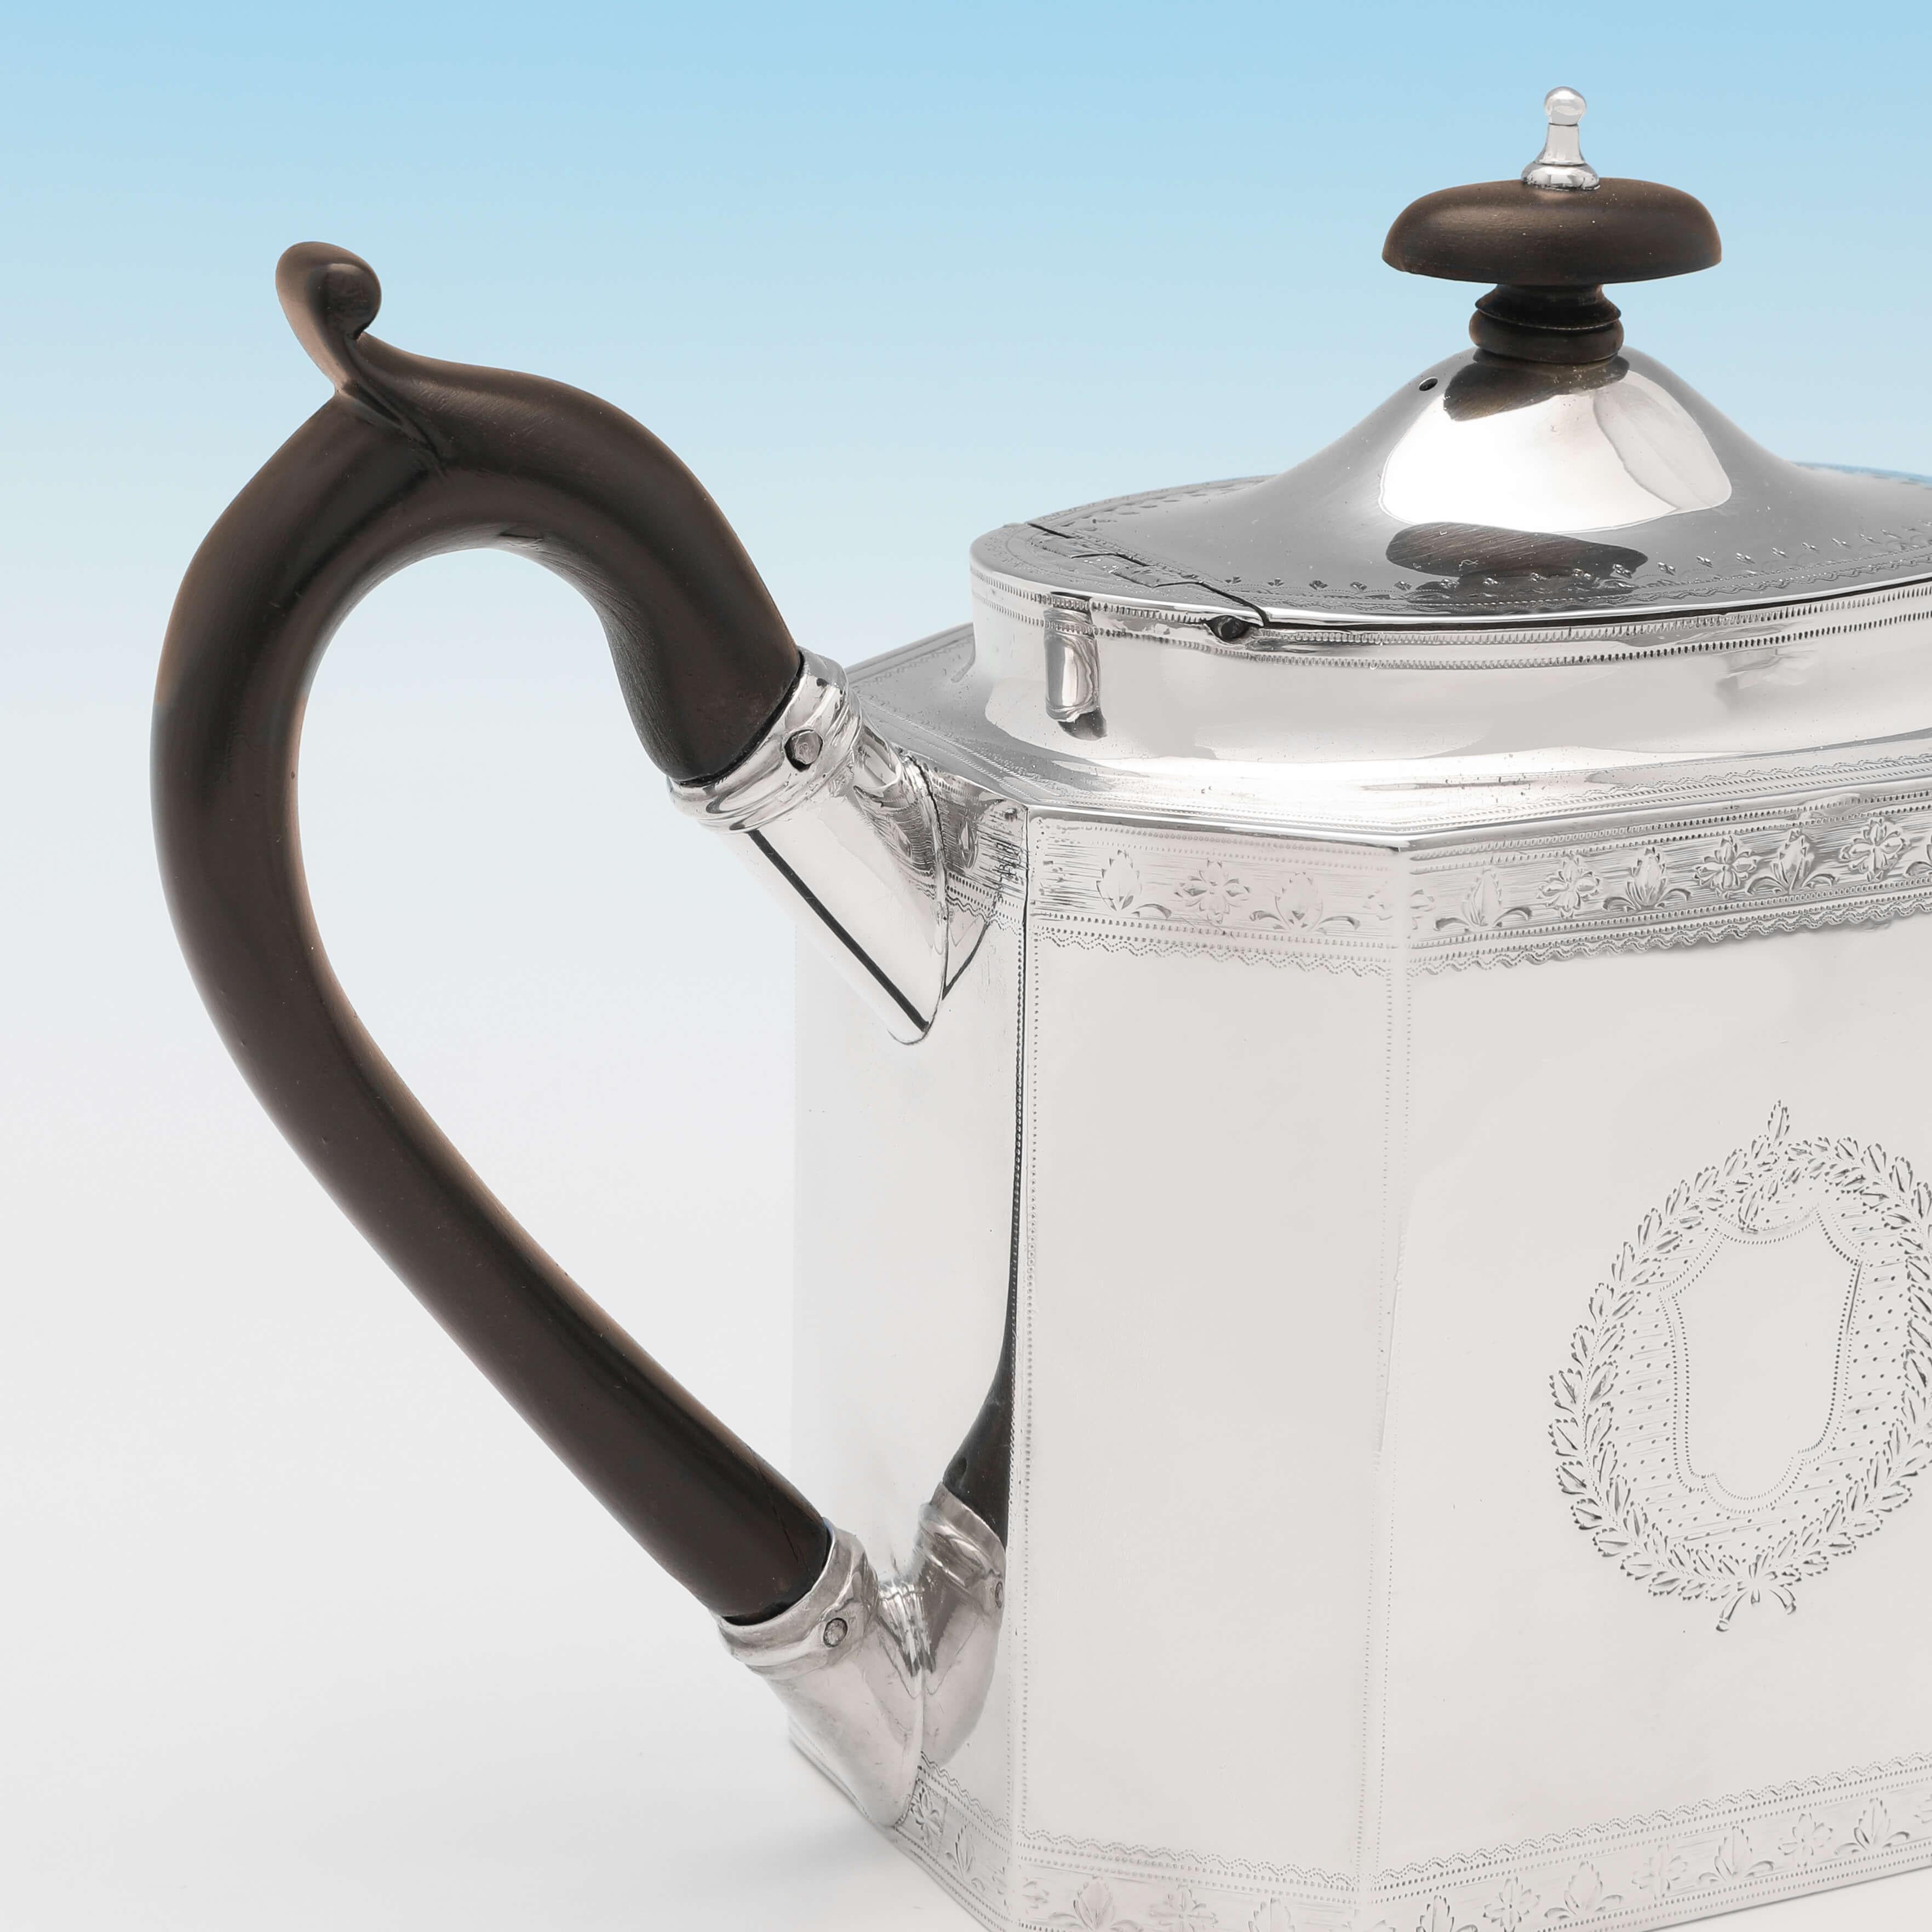 English George III Neoclassical Antique Sterling Silver Teapot & Stand from 1793-1794 For Sale